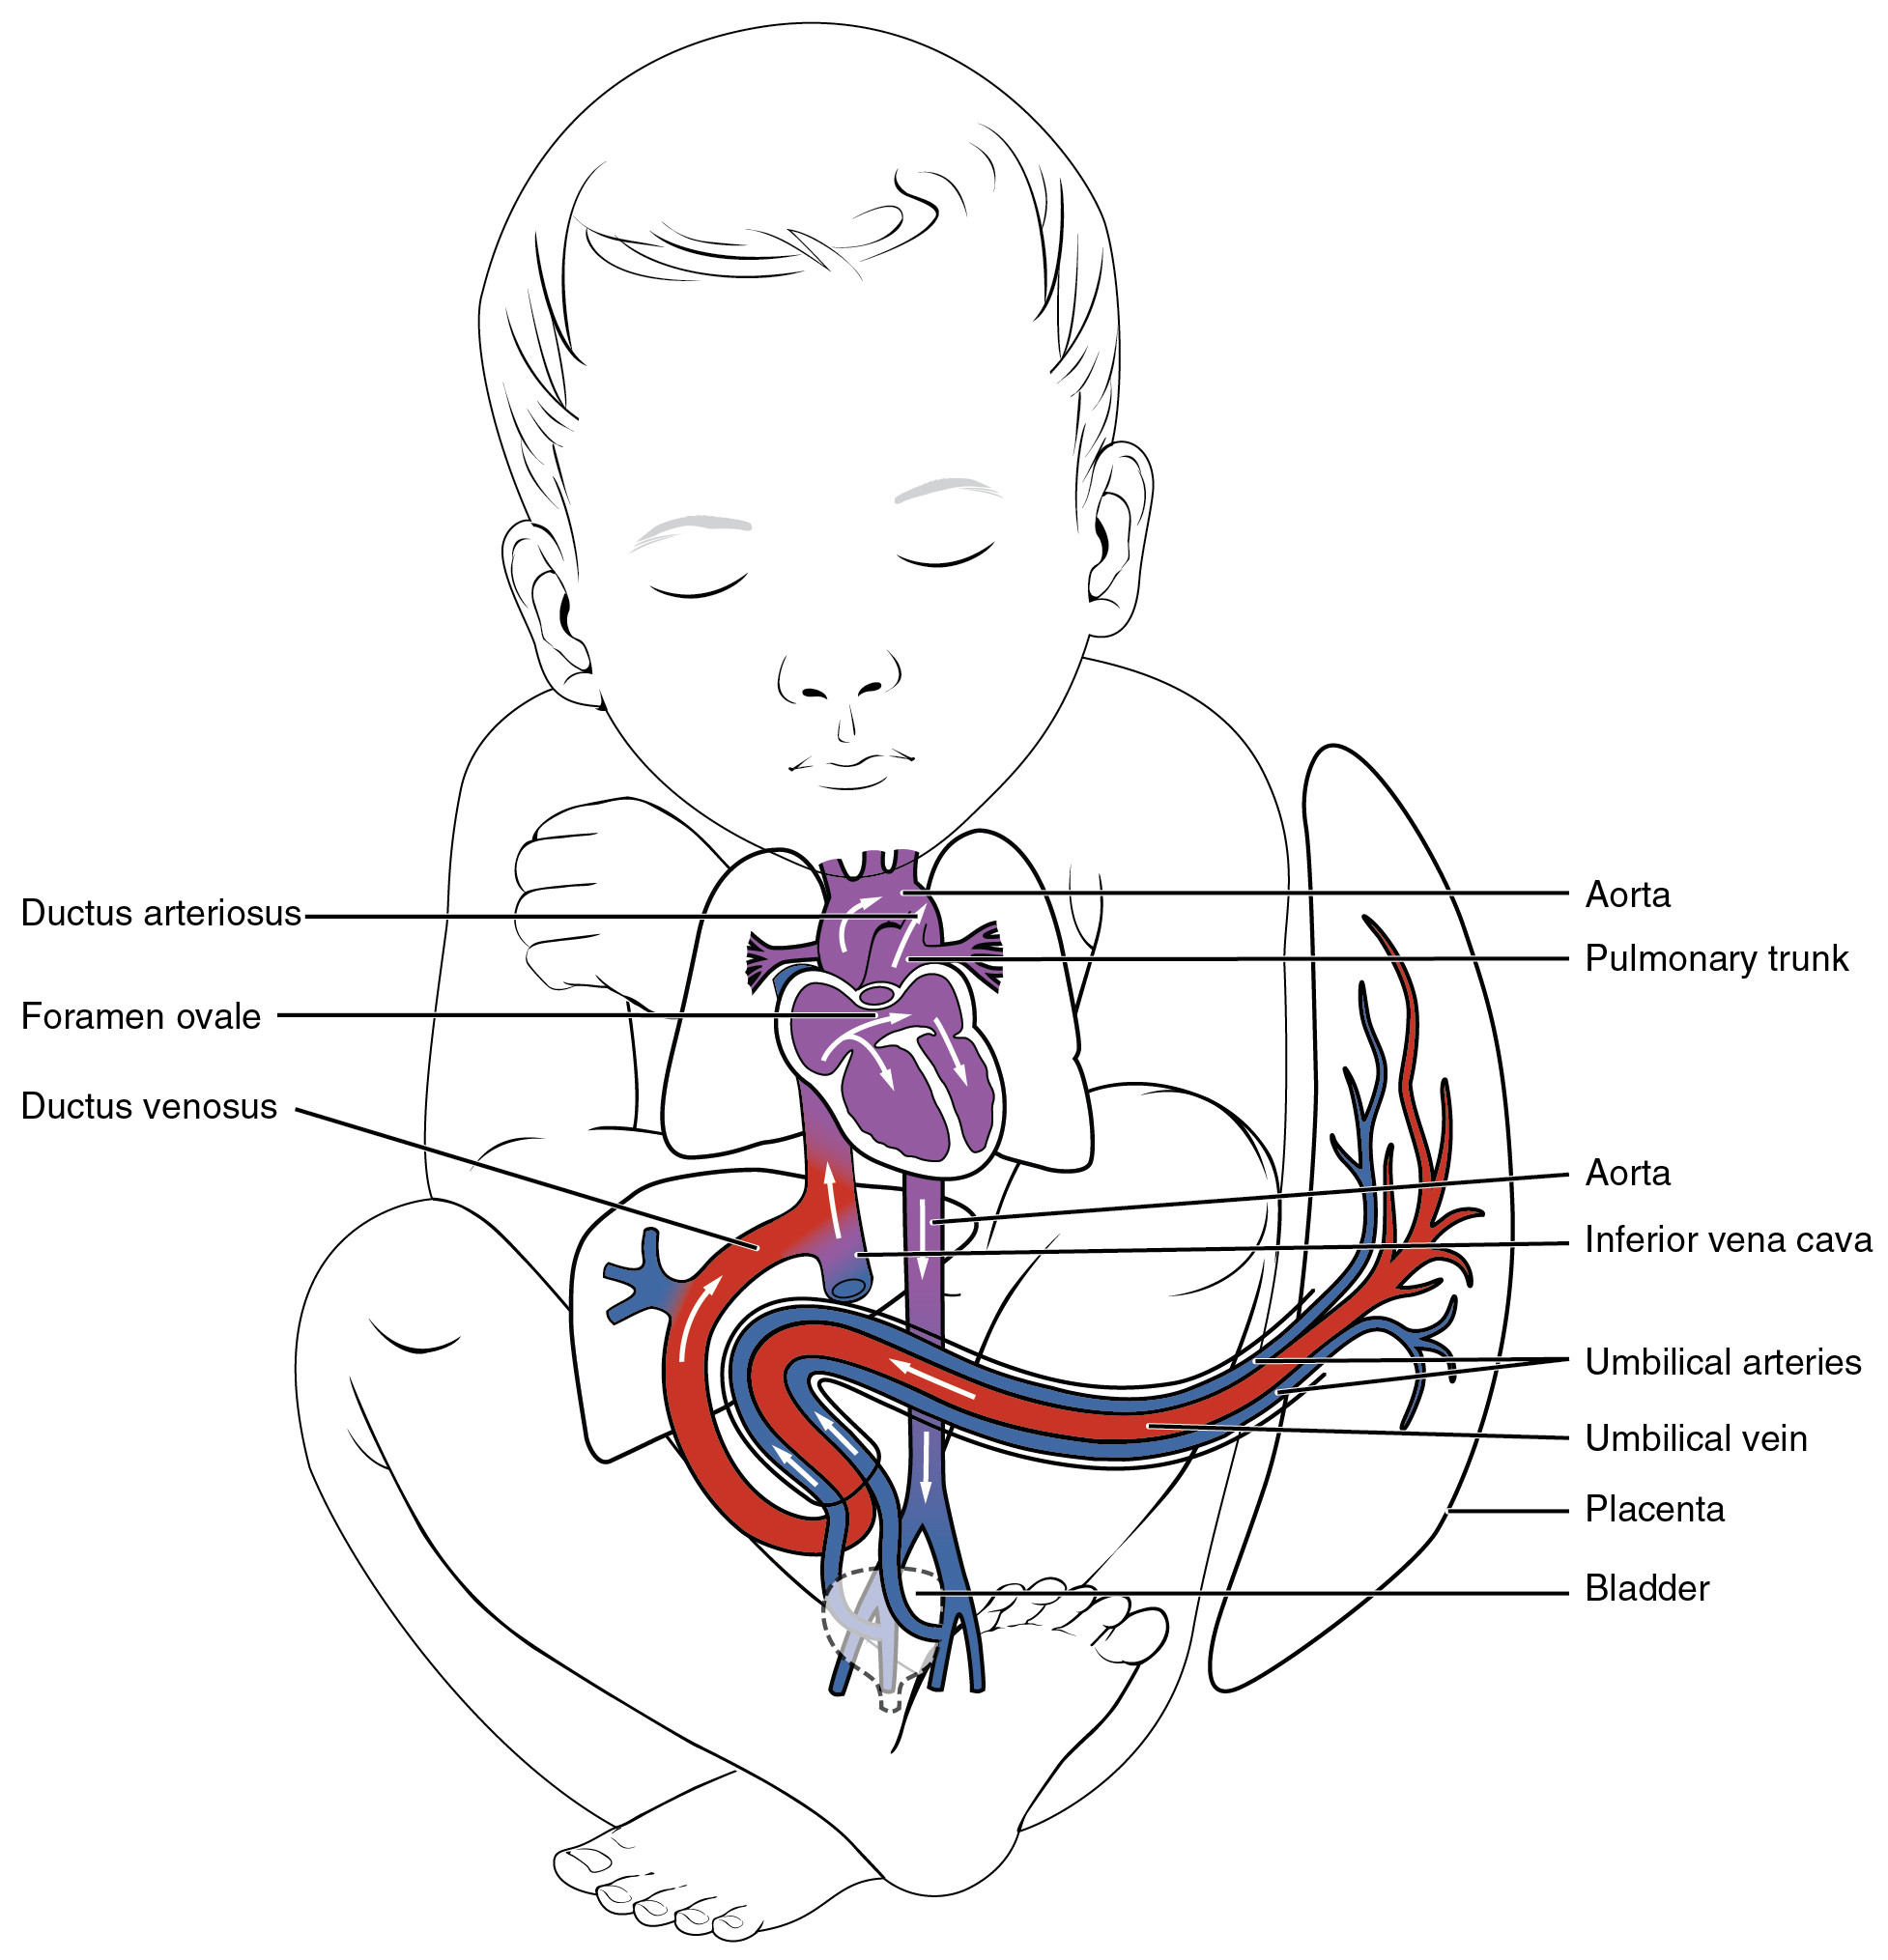 Diagram of fetal shunts that bypass the pulmonary circuit and the liver.